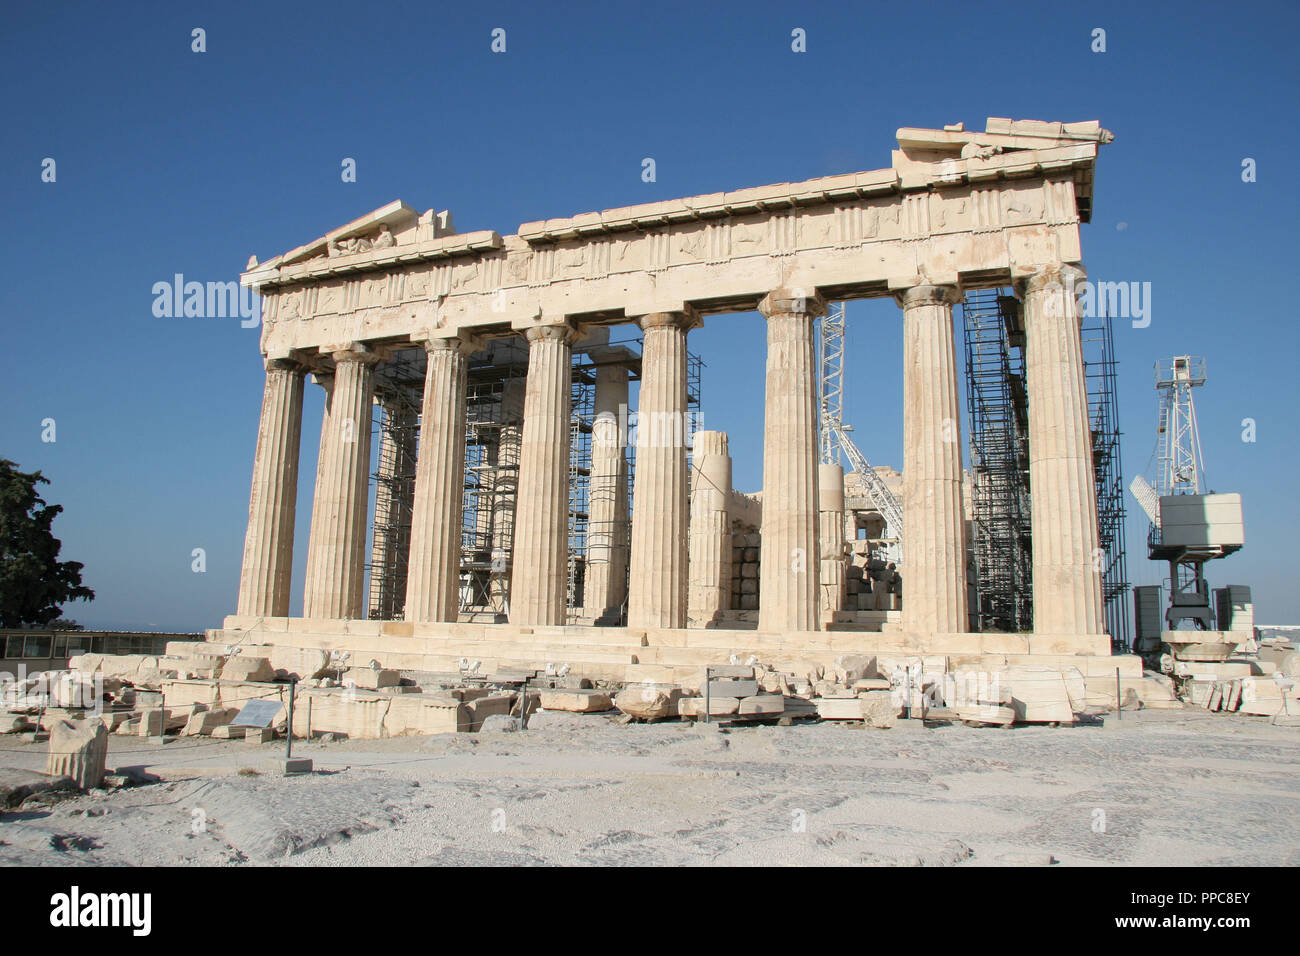 Greek Art. Parthenon. Was built between 447-438 BC. in Doric style under leadership of Pericles. The building was designed by the architects Ictinos and Callicrates. Acropolis. Athens. Attica. Central Greek. Europe. Stock Photo